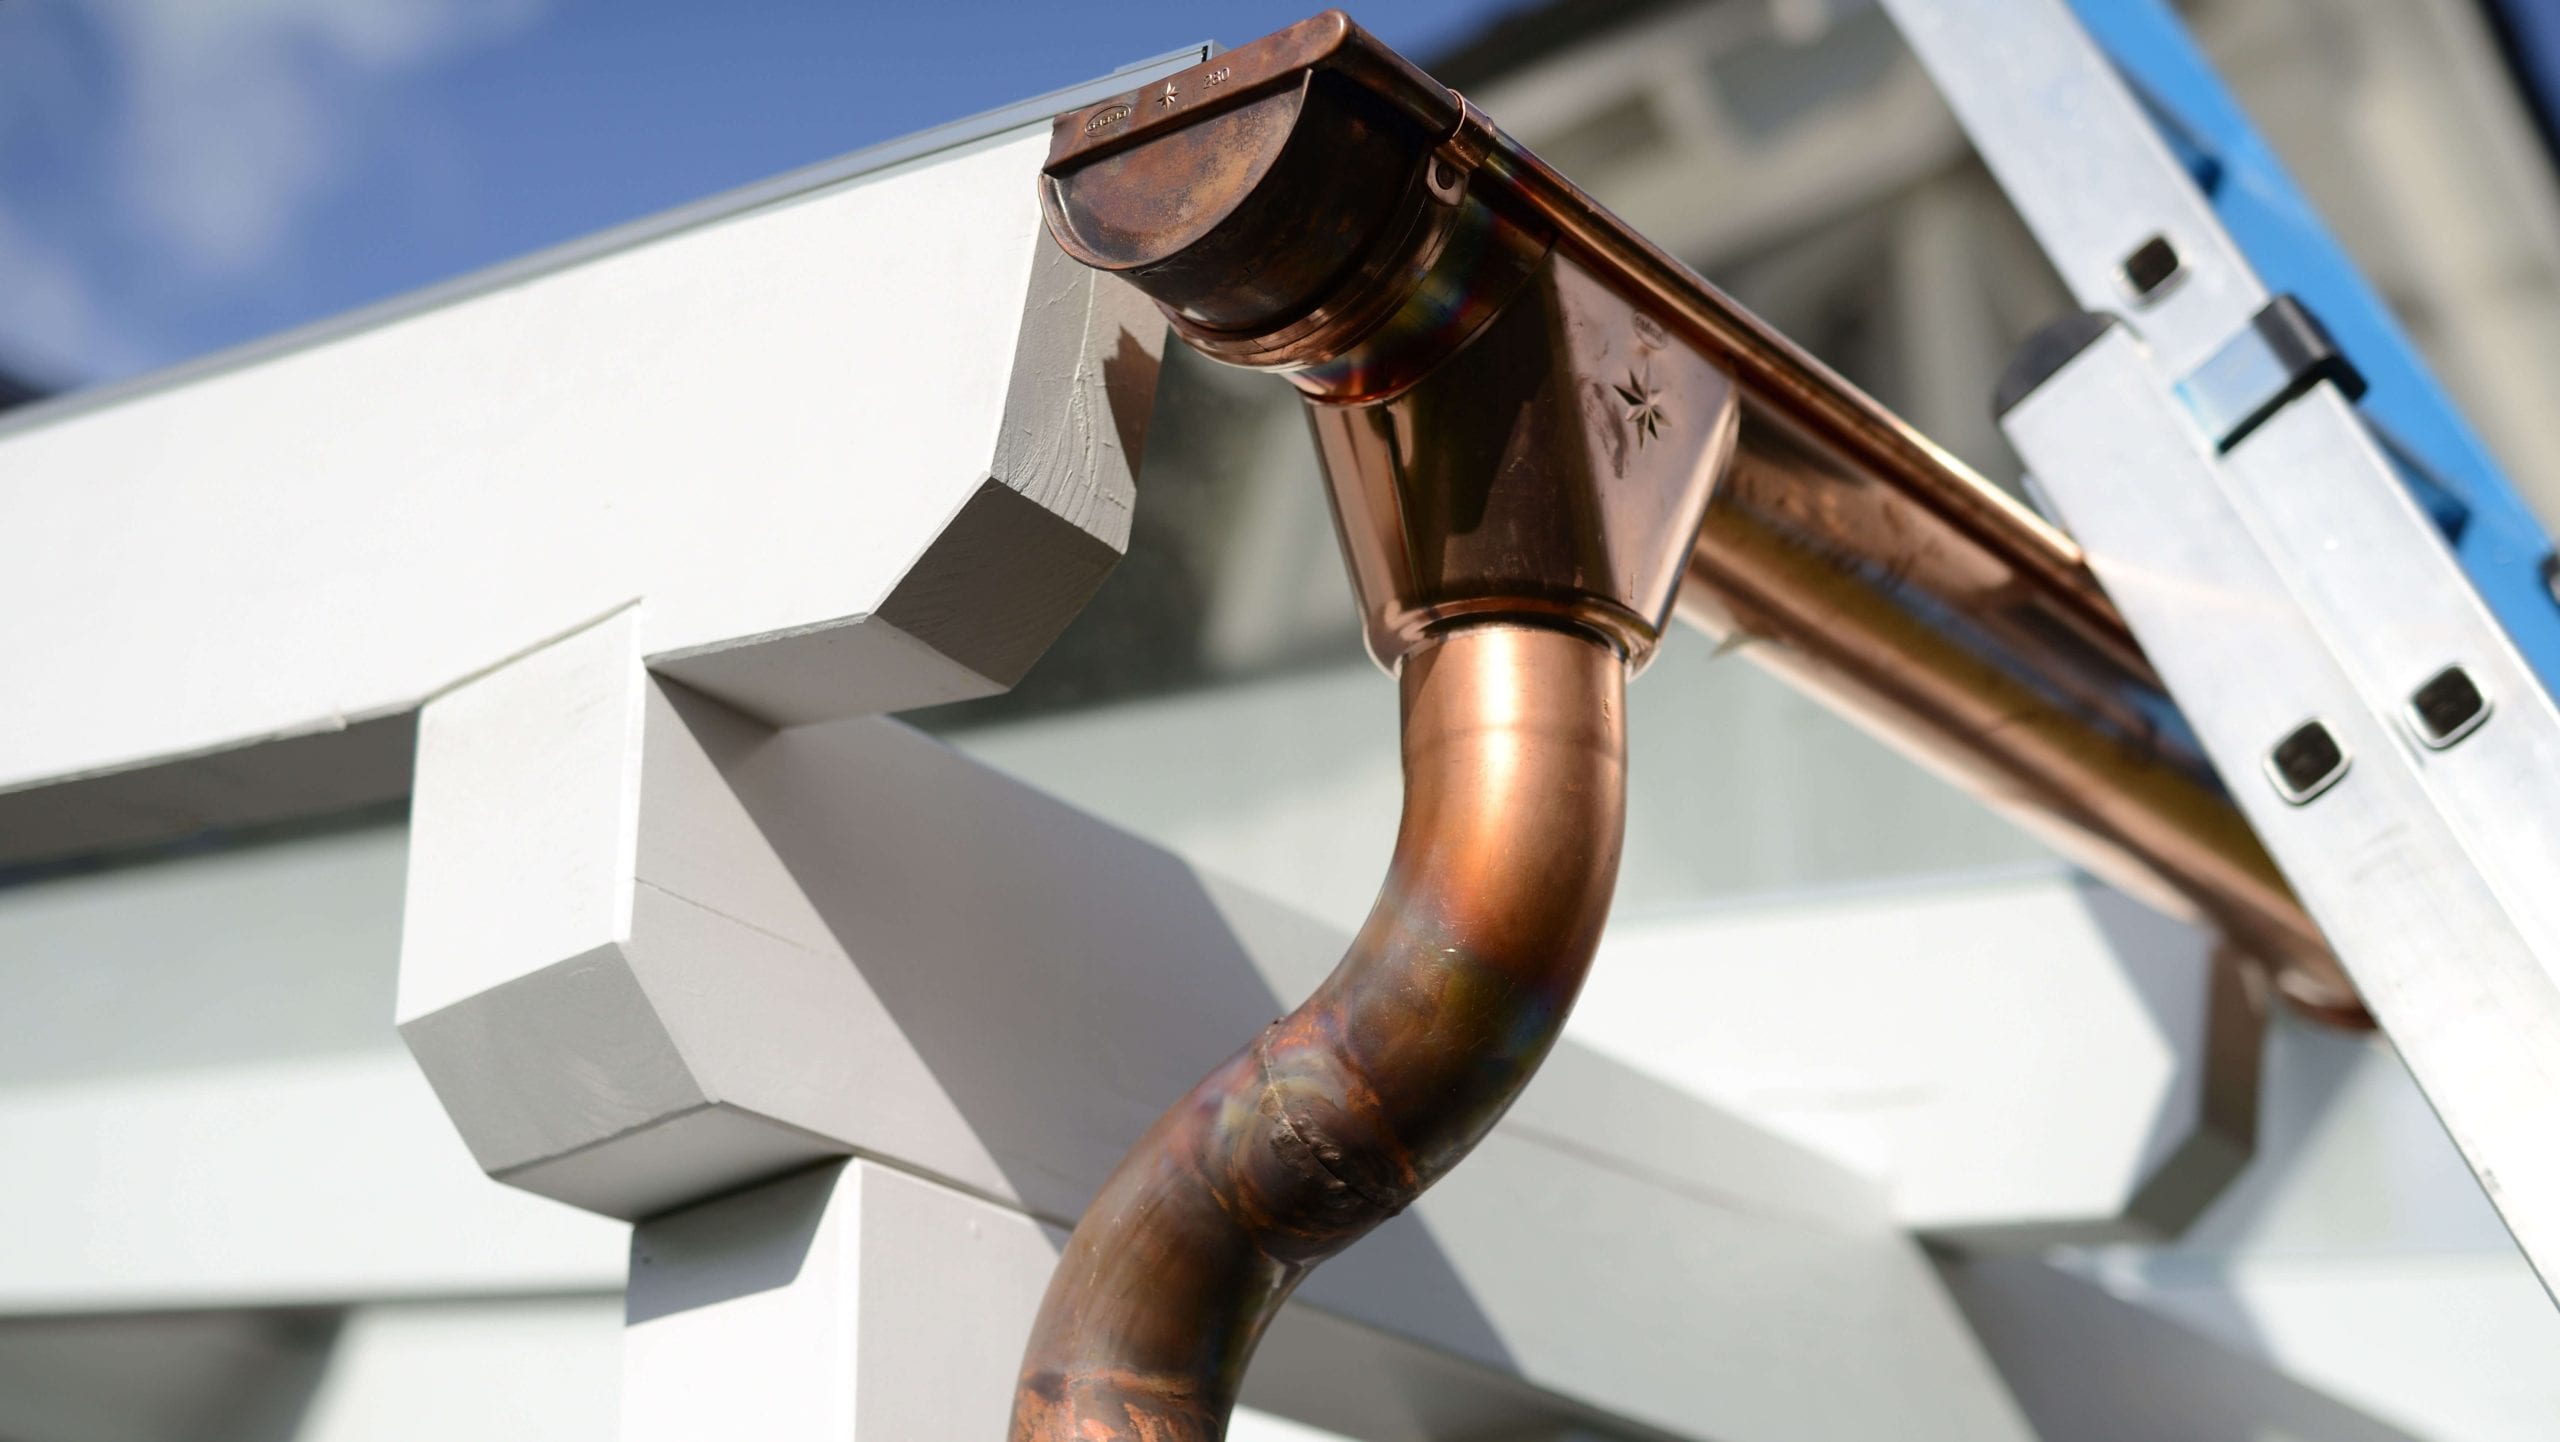 Make your property stand out with copper gutters. Contact for gutter installation in Columbia